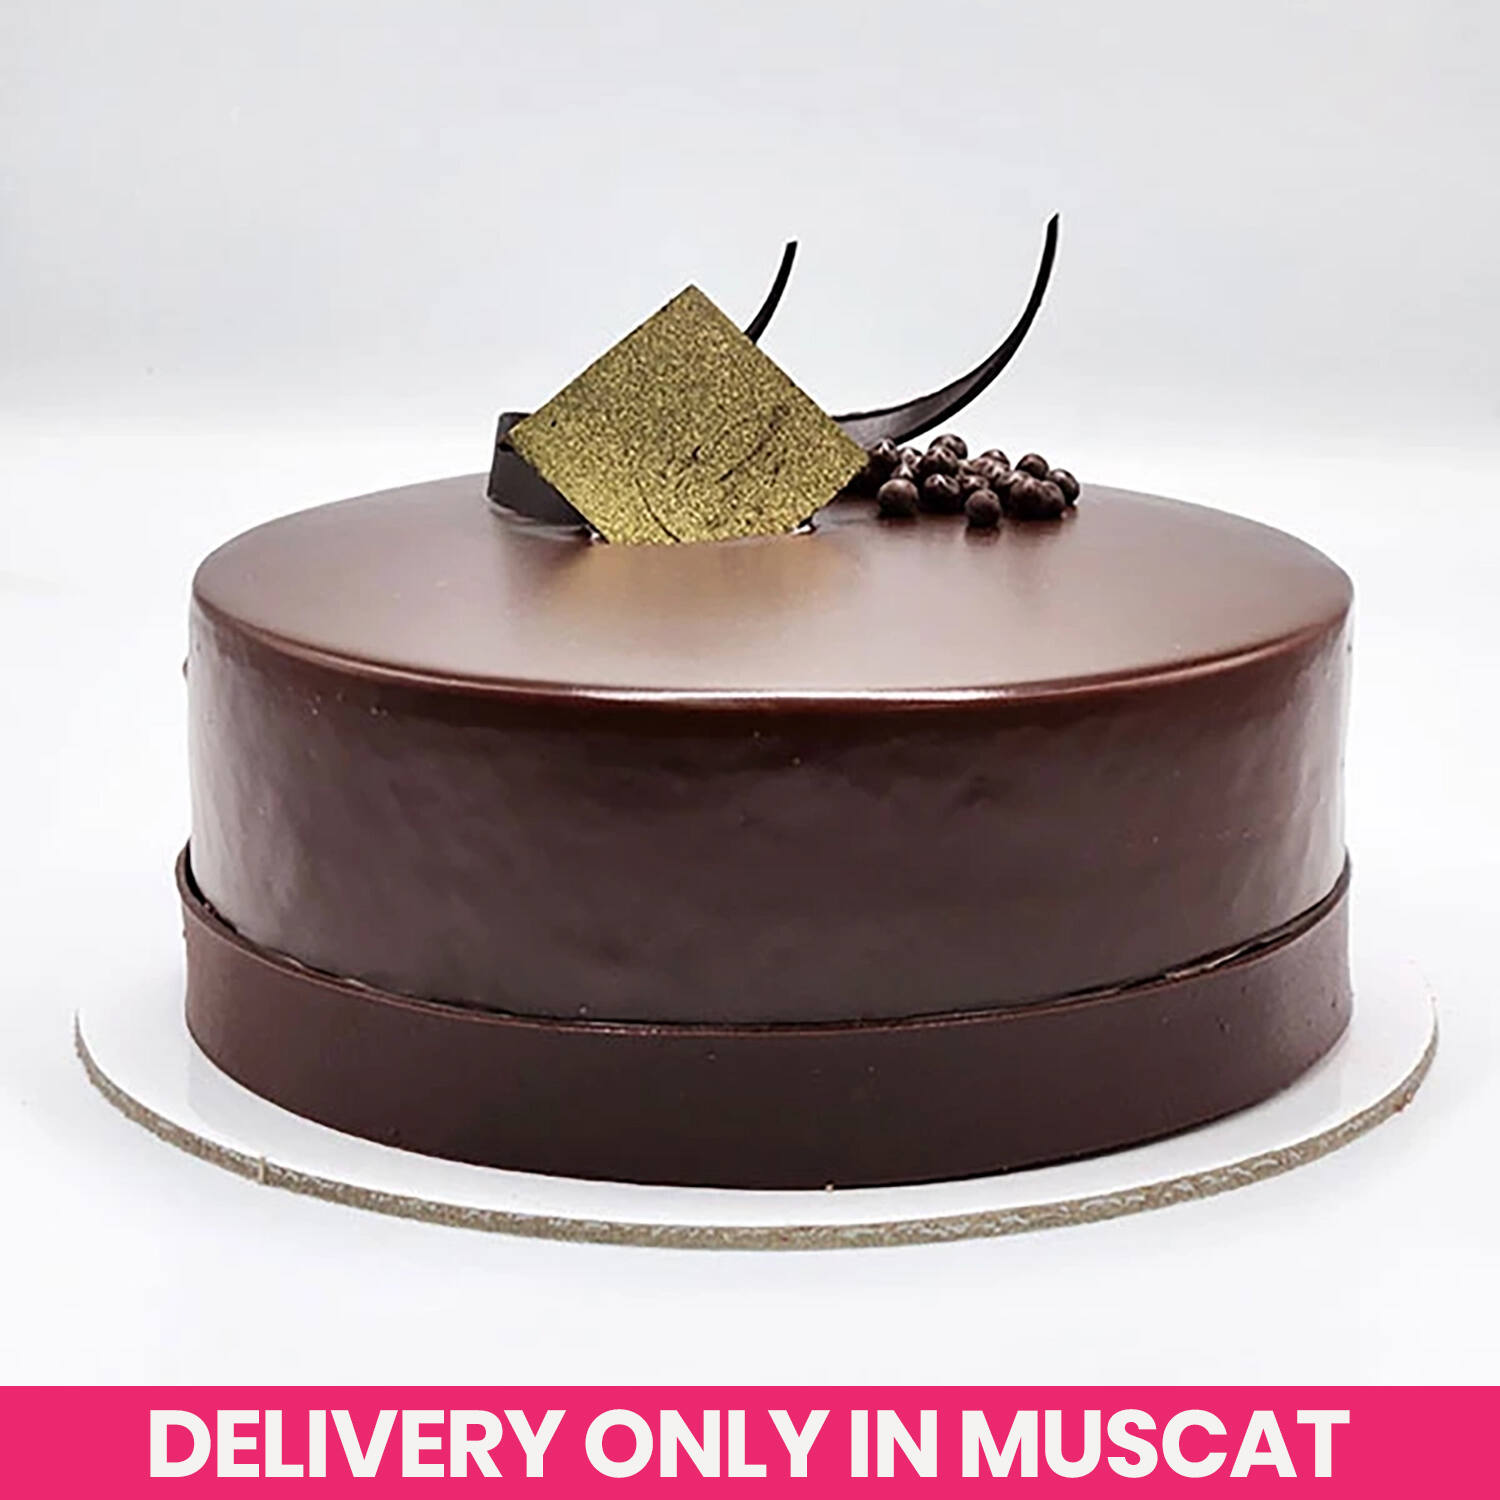 Chocolate Delight Cake: Decadent Bliss of Smooth Chocolates